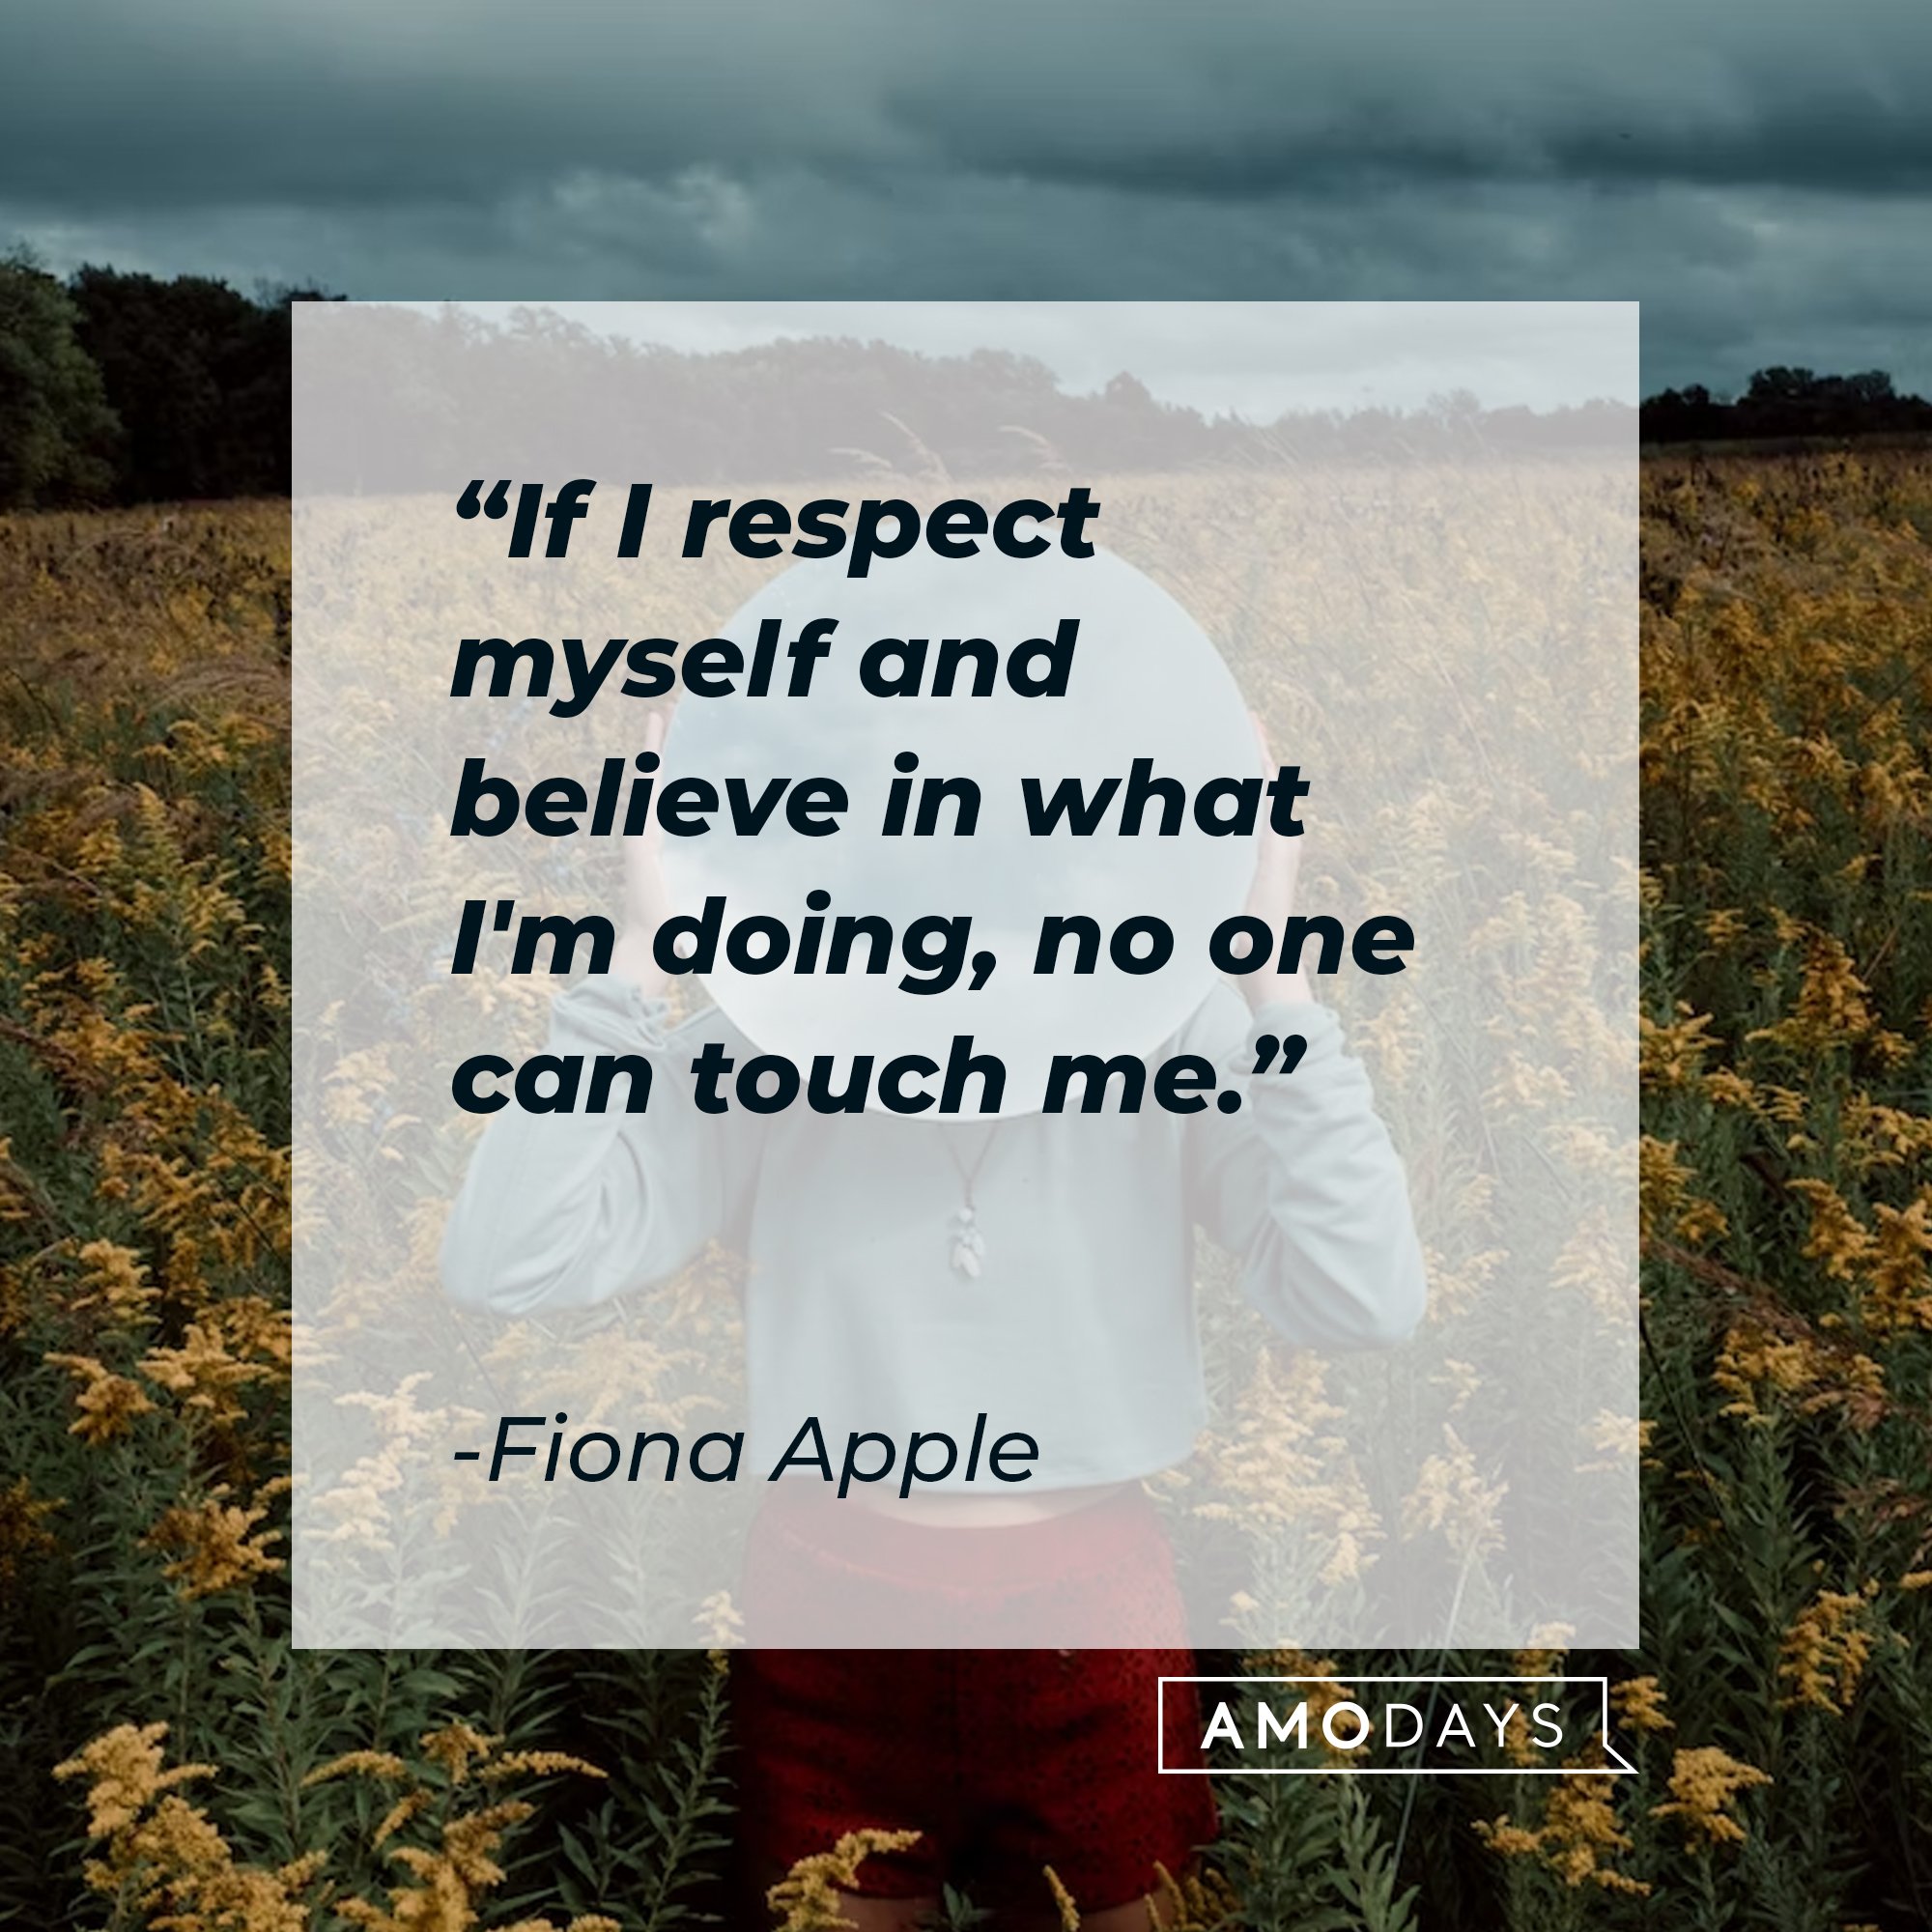 Fiona Apple’s quote: "If I respect myself and believe in what I'm doing, no one can touch me." | Image: AmoDays